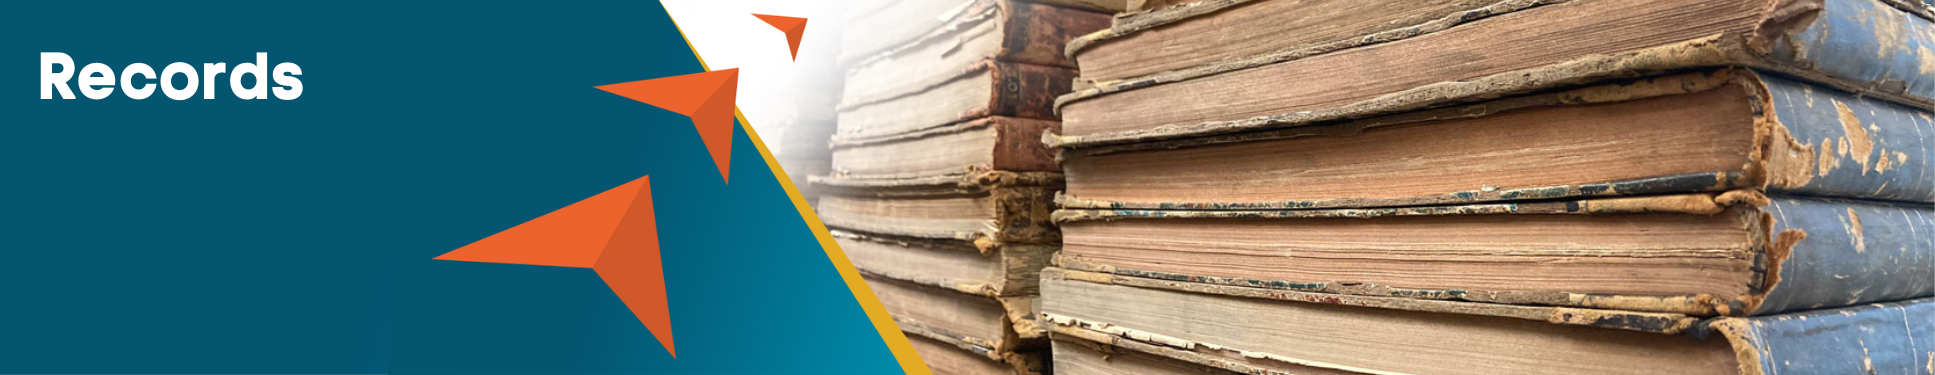 Record banner with three orange arrows pointing to old, tattered books in a stack.